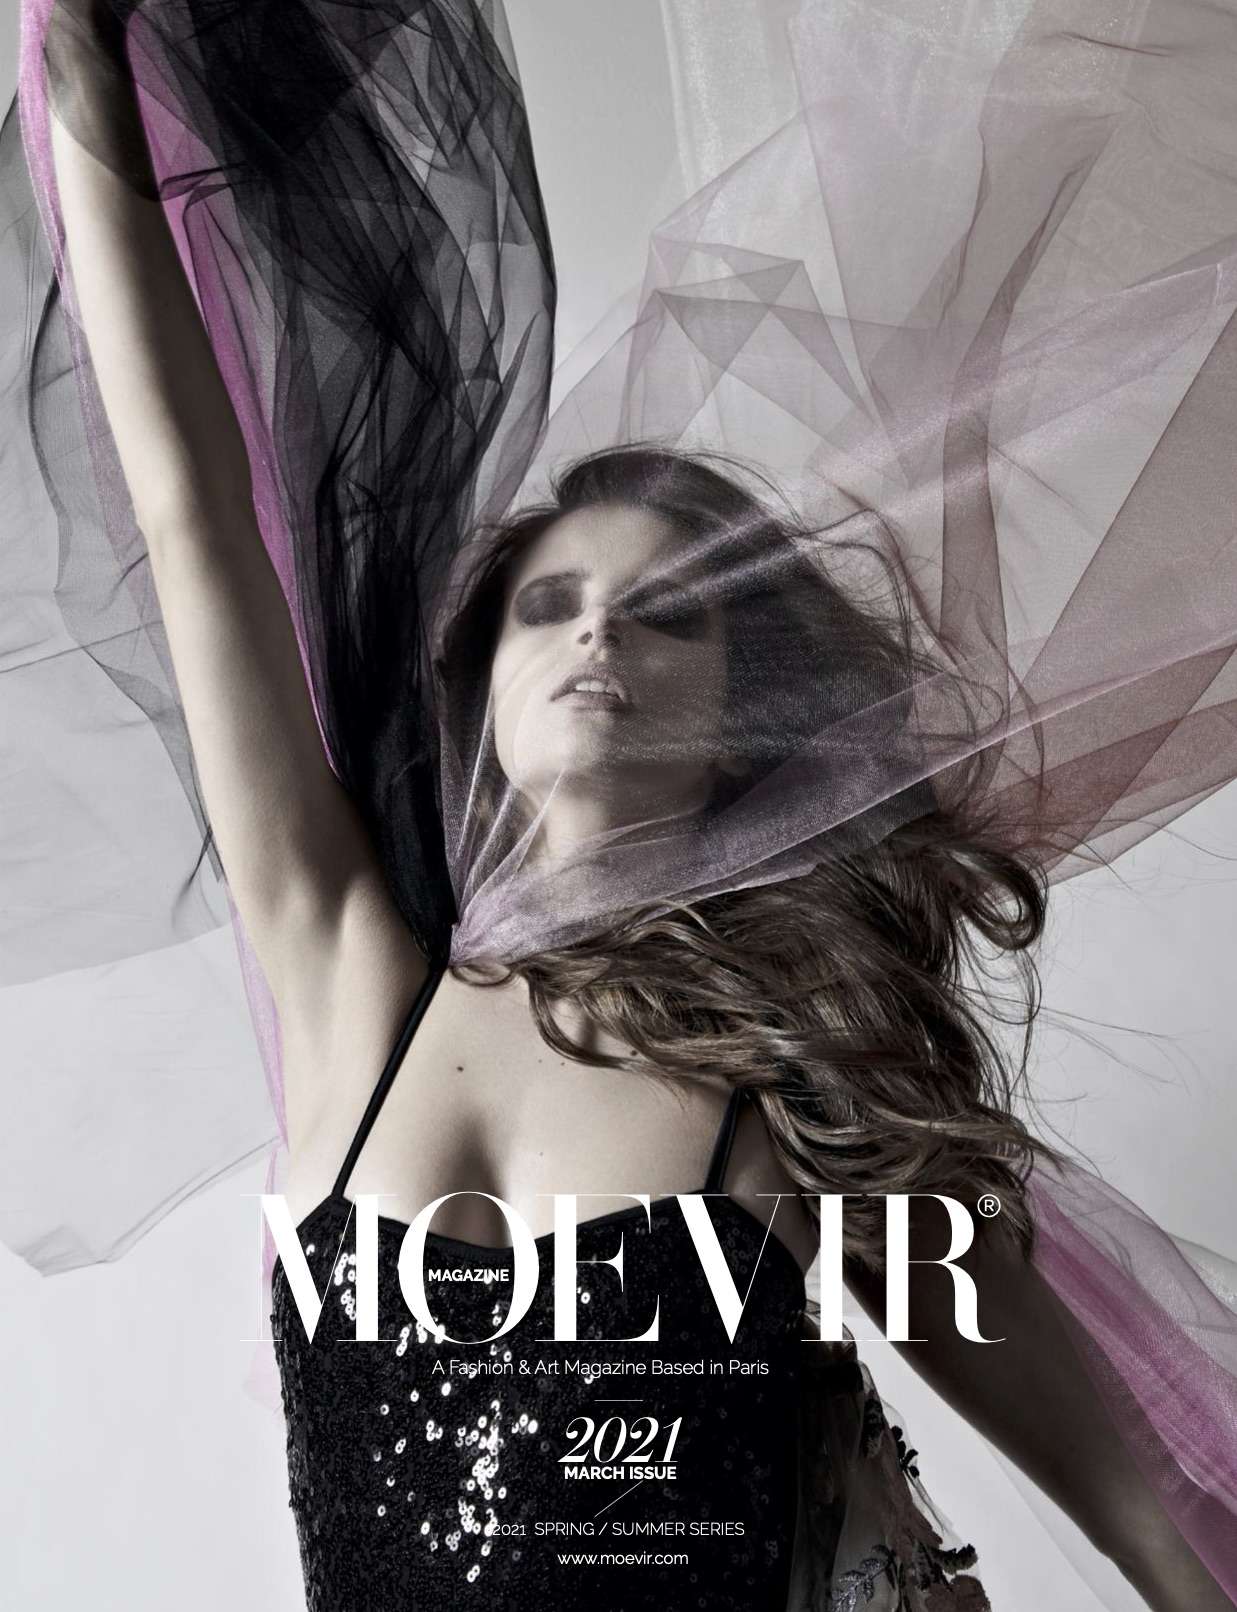 Moevir_Magazine_March_Issue_2021